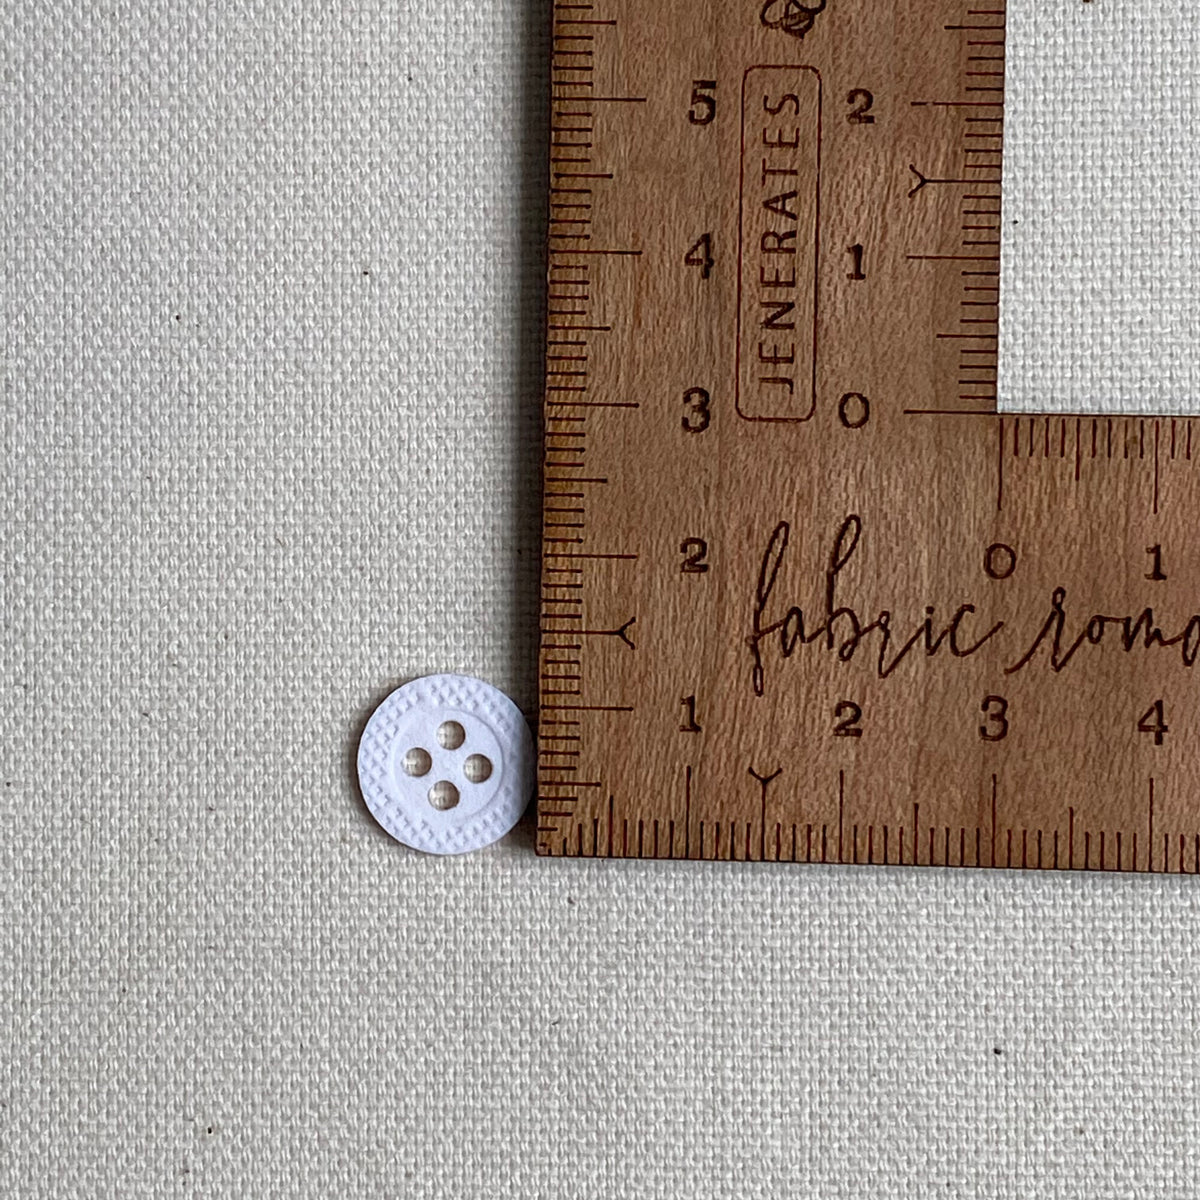 Recycled Cellulose Button - White (multiple sizes)